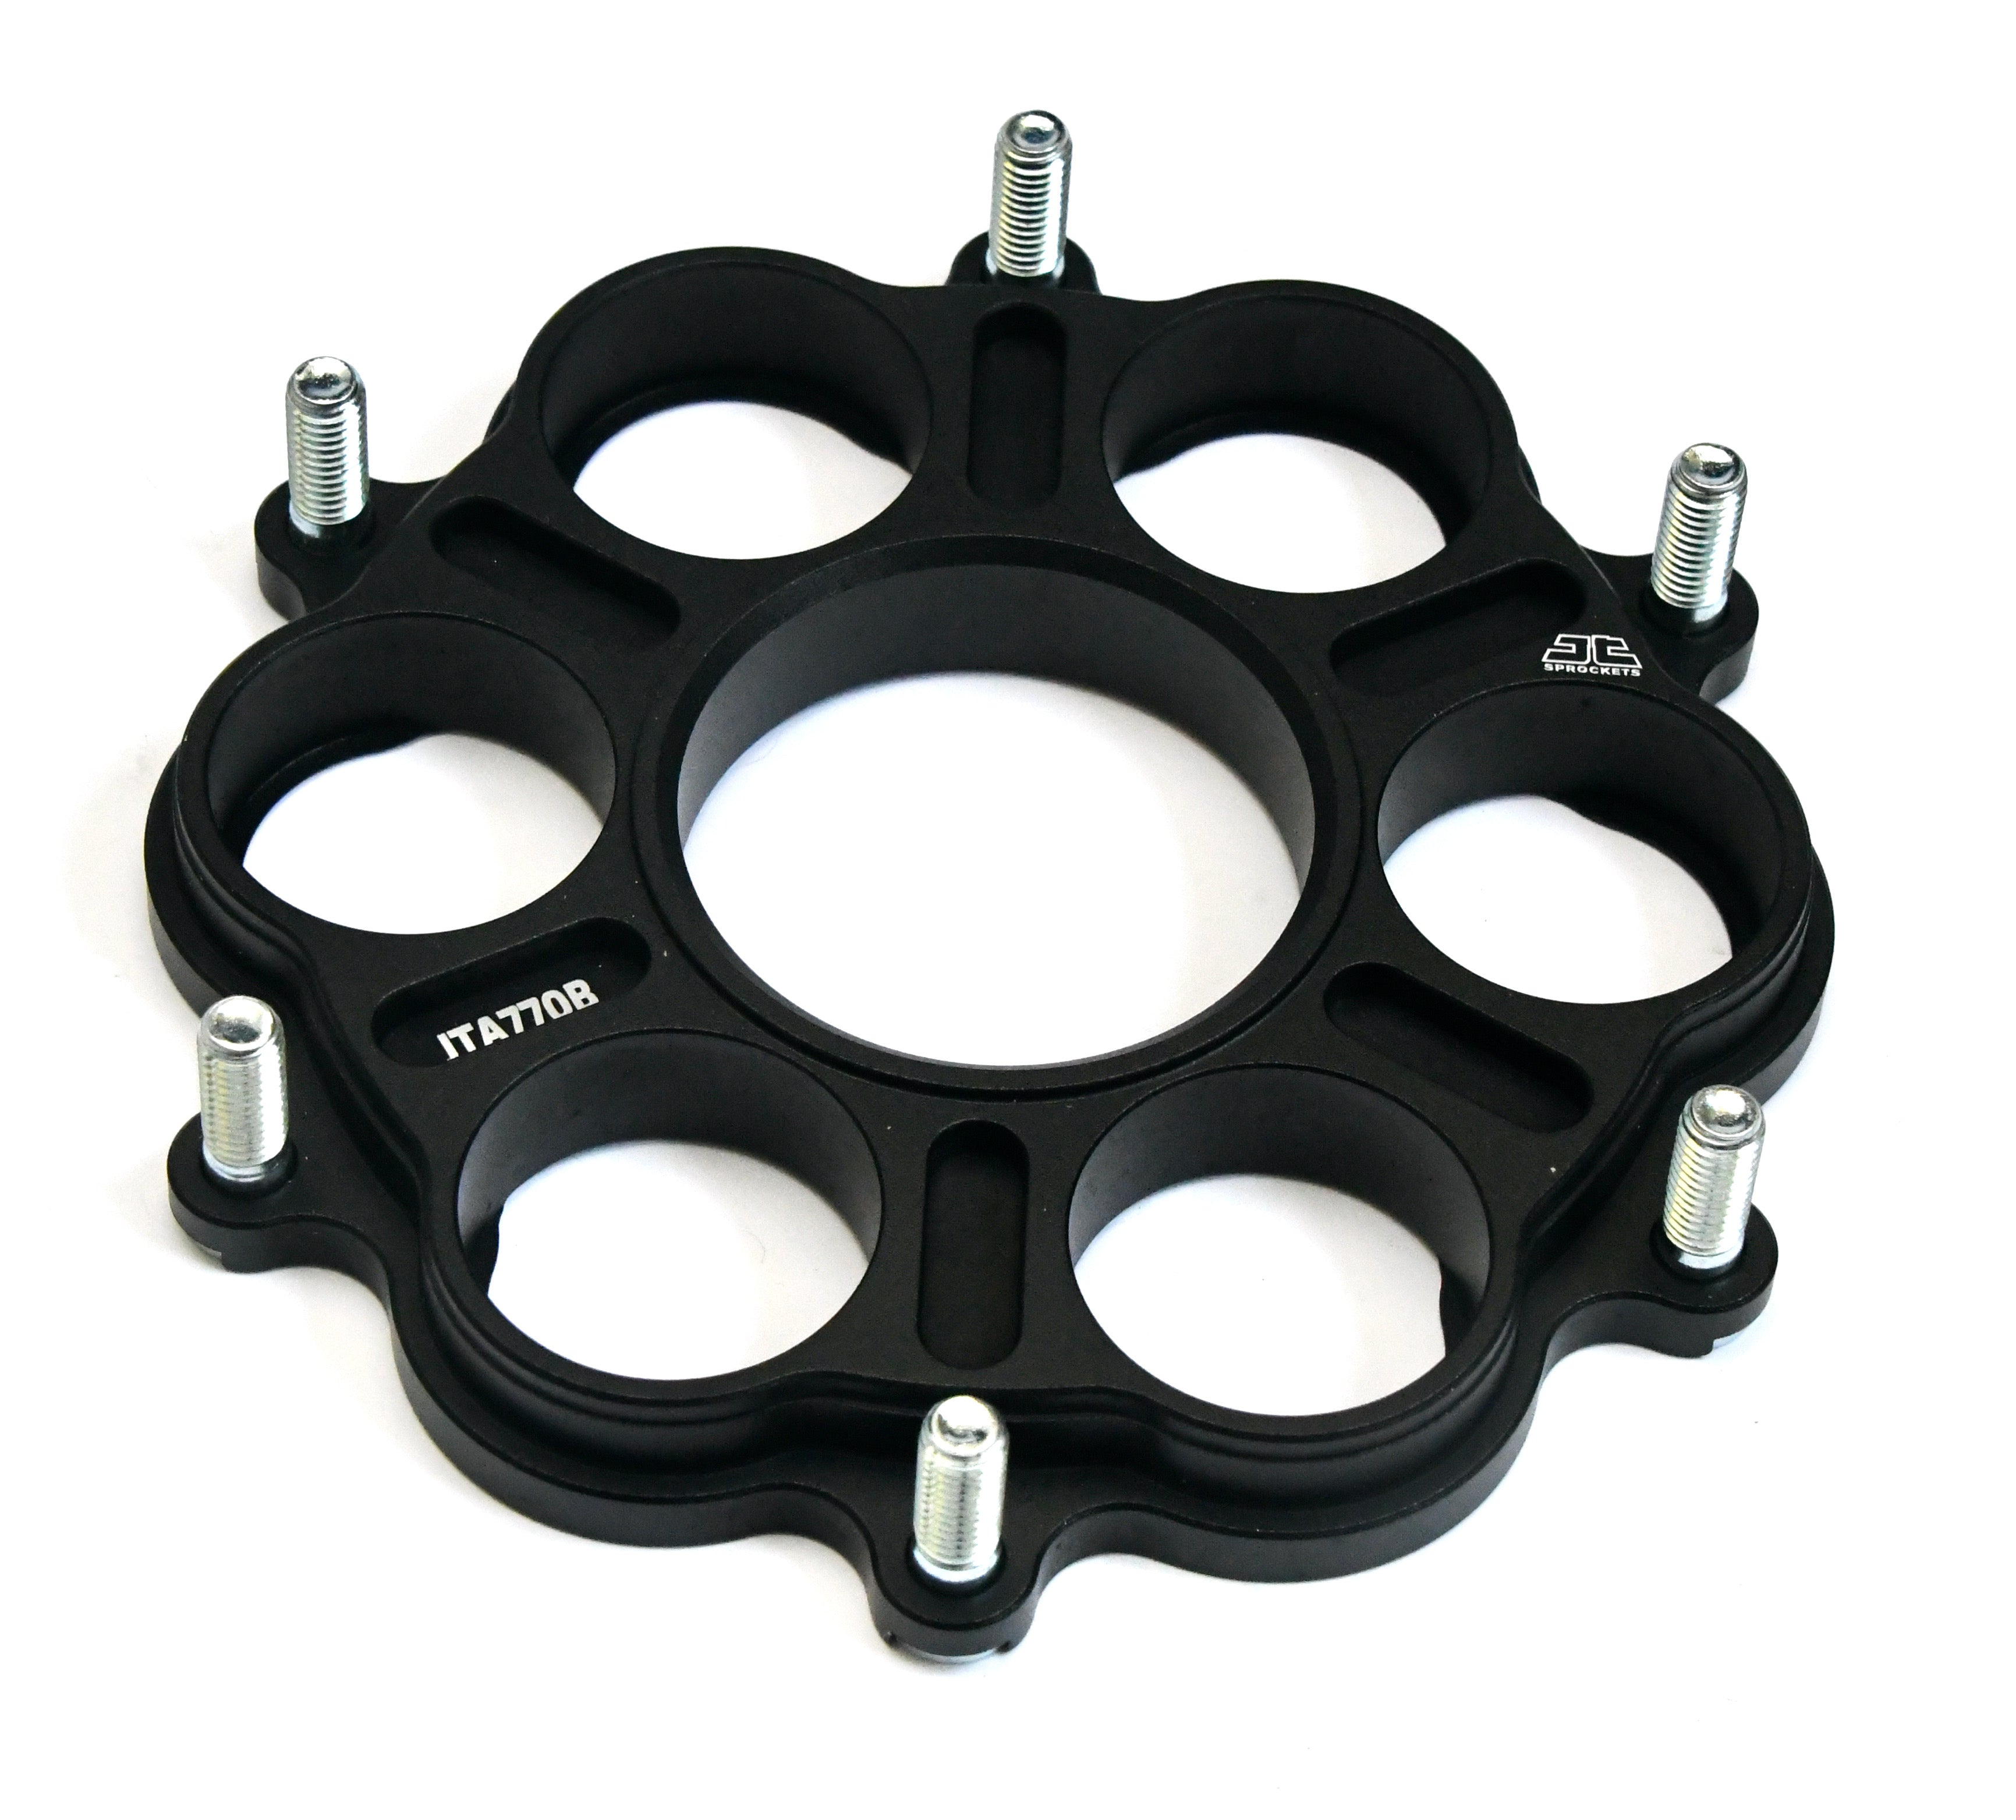 Add the an Aluminium Quick Release Sprocket Carrier Save £5 - When bought with a matching sprocket